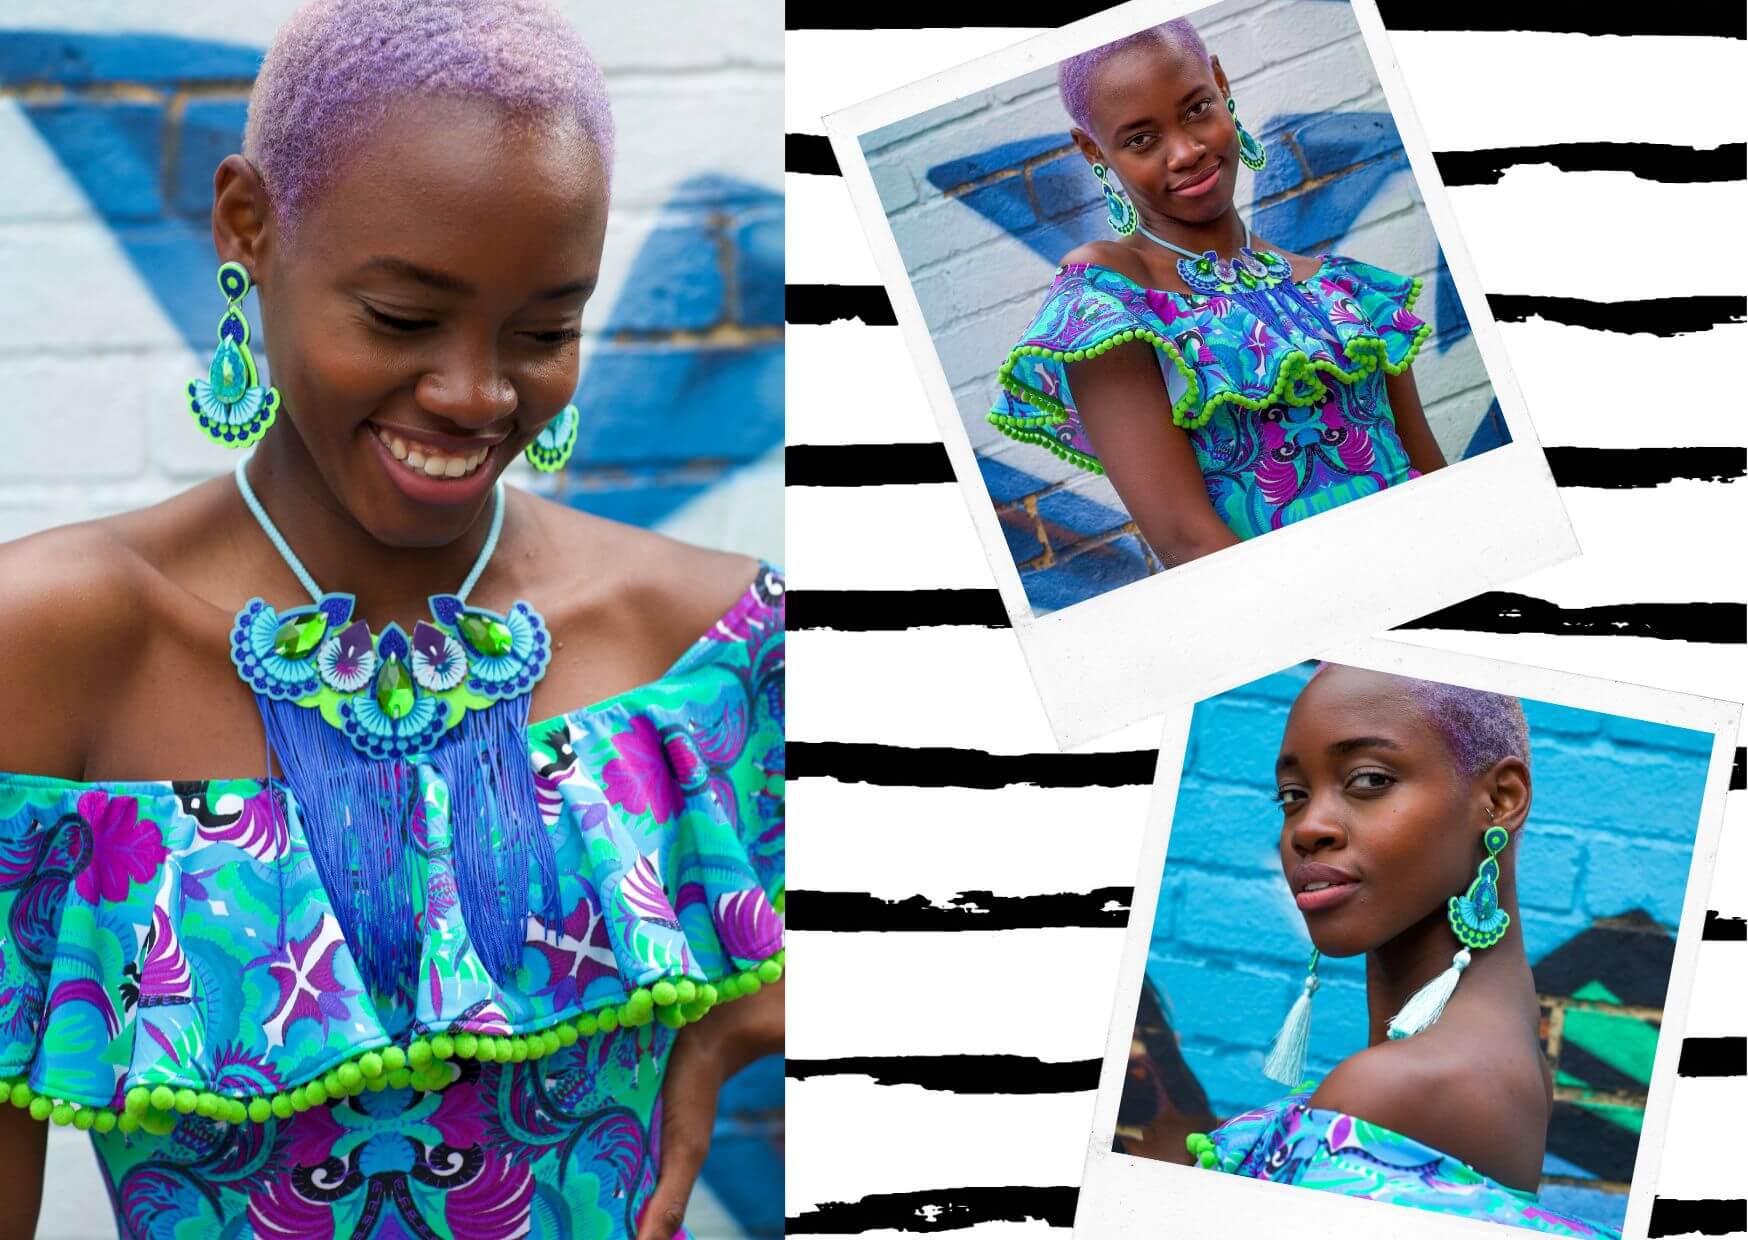 Three photos (two polaroid look frames) are scattered at jaunty angles on a white background with black hand drawn looking stripes. All three images are of a young black woman with cropped lilac hair. She wears a turquoise and purple brightly patterned, off the shoulder body suit with a floppy, pom pom trimmed frill and a statement bib necklace and earrings in similar colours. She is smiling, posing for the camera.